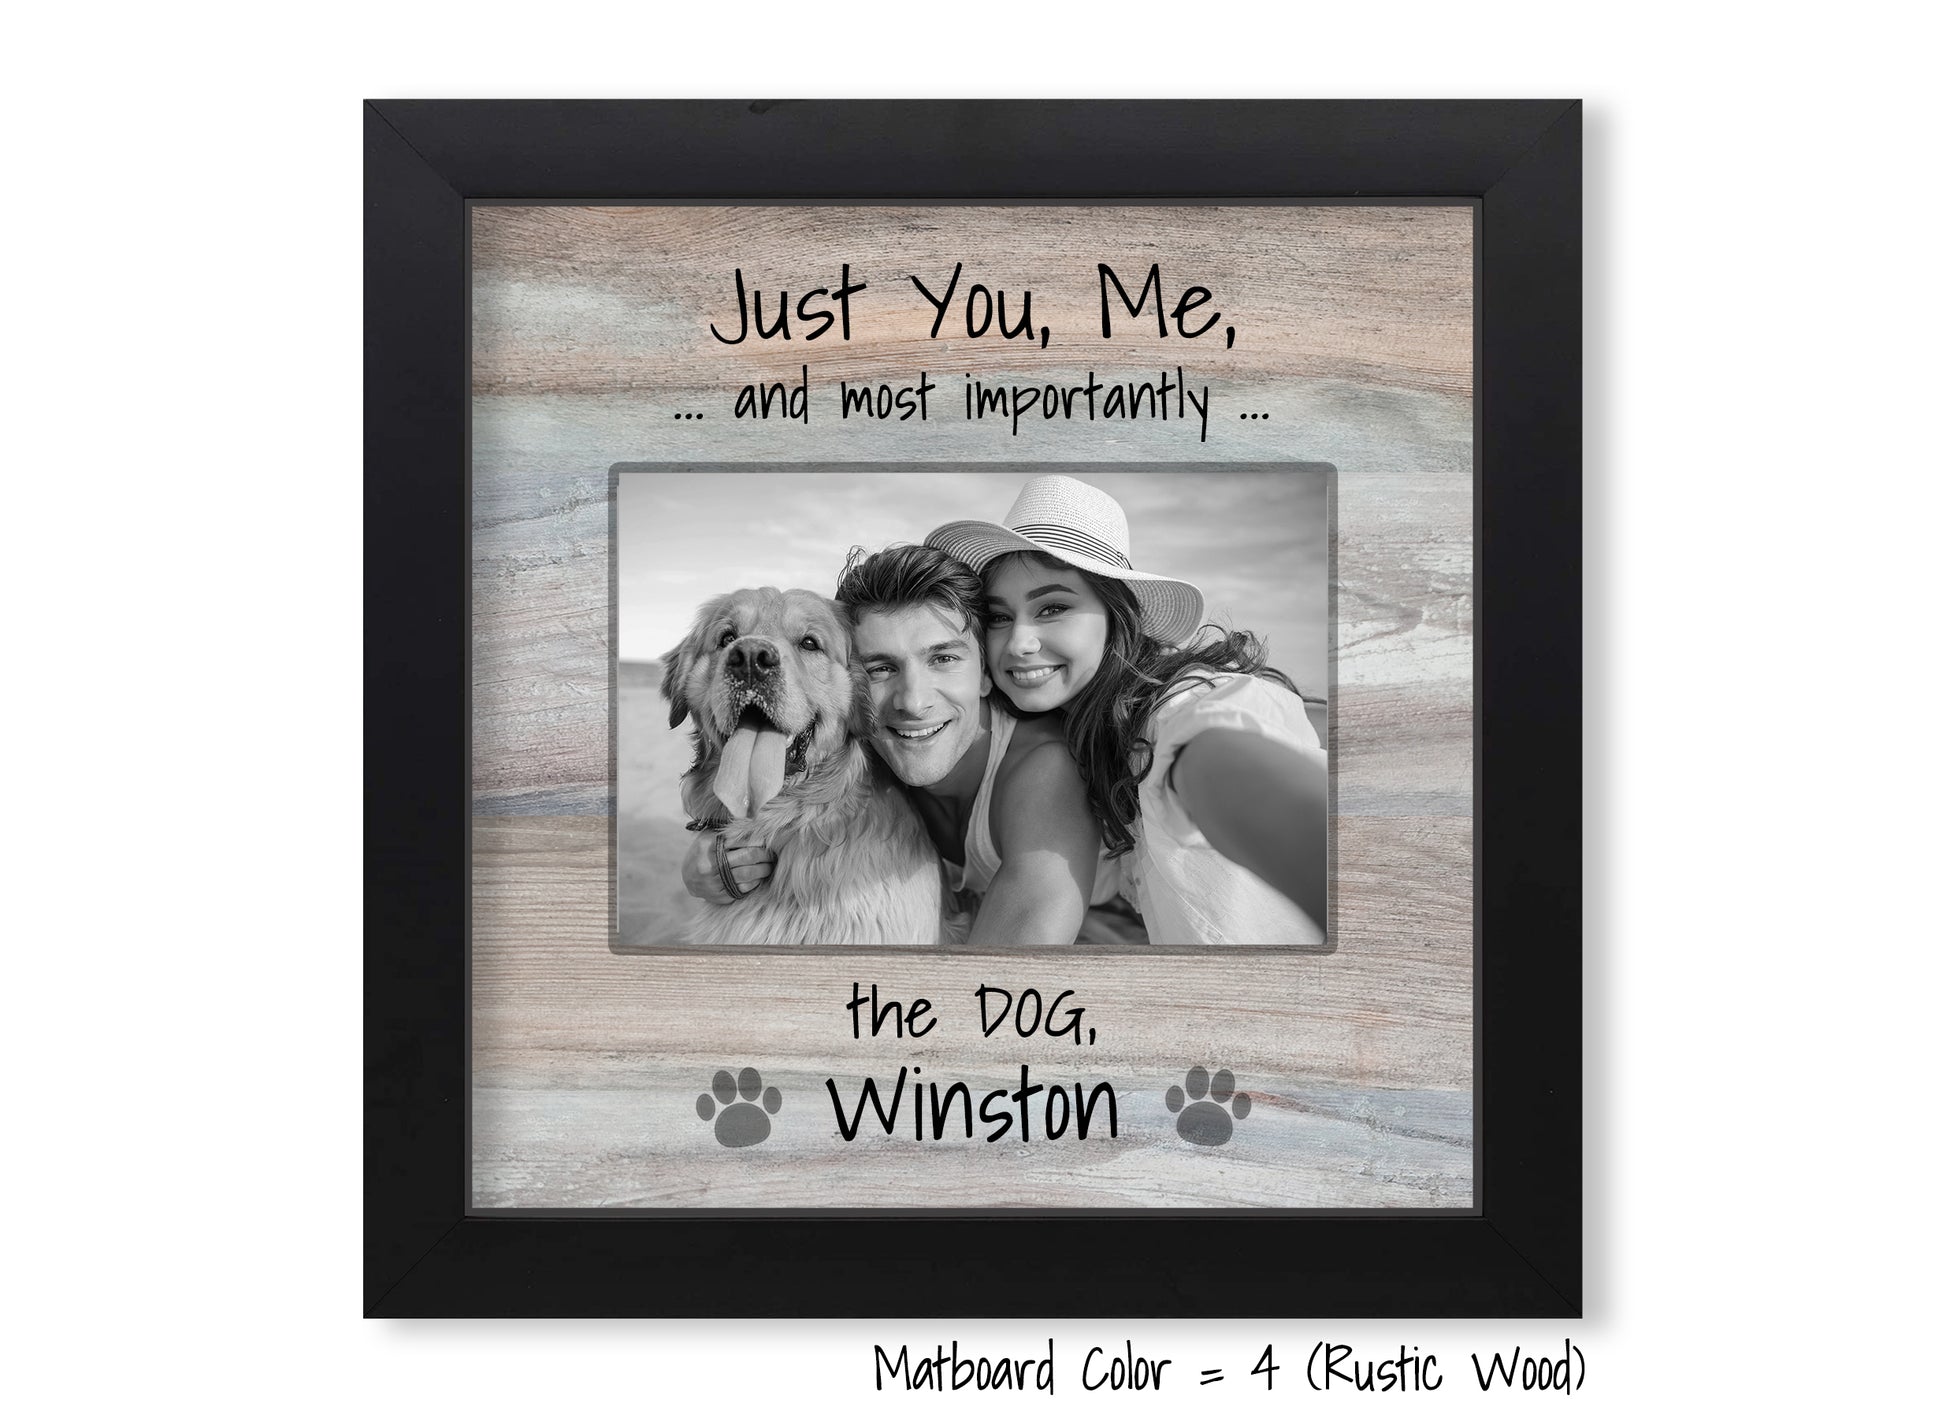 Funny Dog Frame, Just You, Me, and the Dog, 8x8 Picture Frame MatboardMemories   